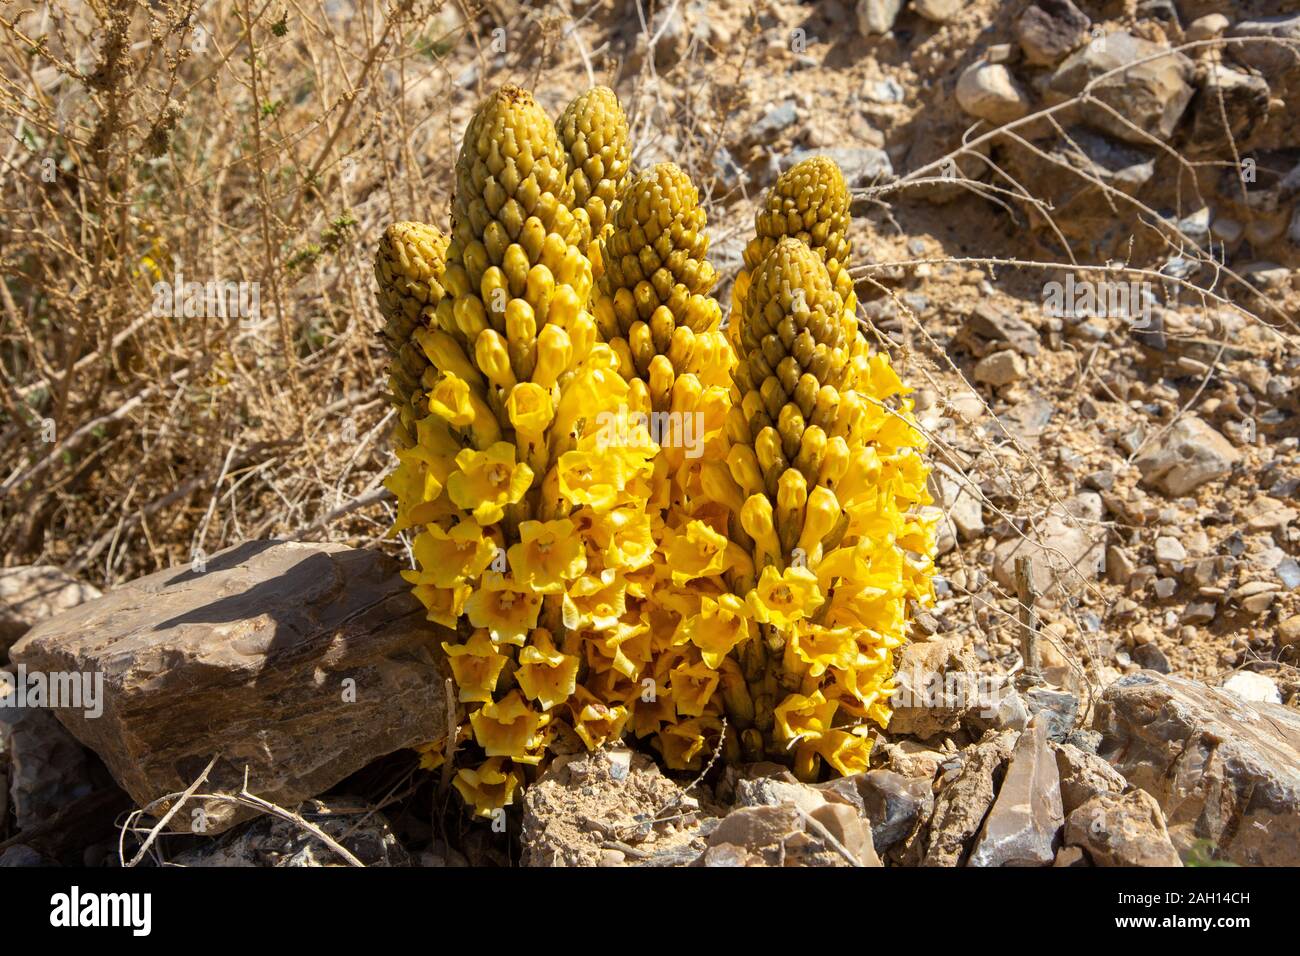 Yellow or desert broomrape, Cistanche tubulosa.  This plant is a parasitic member of the broomrape family. Photographed in the Negev Desert, Israel Stock Photo